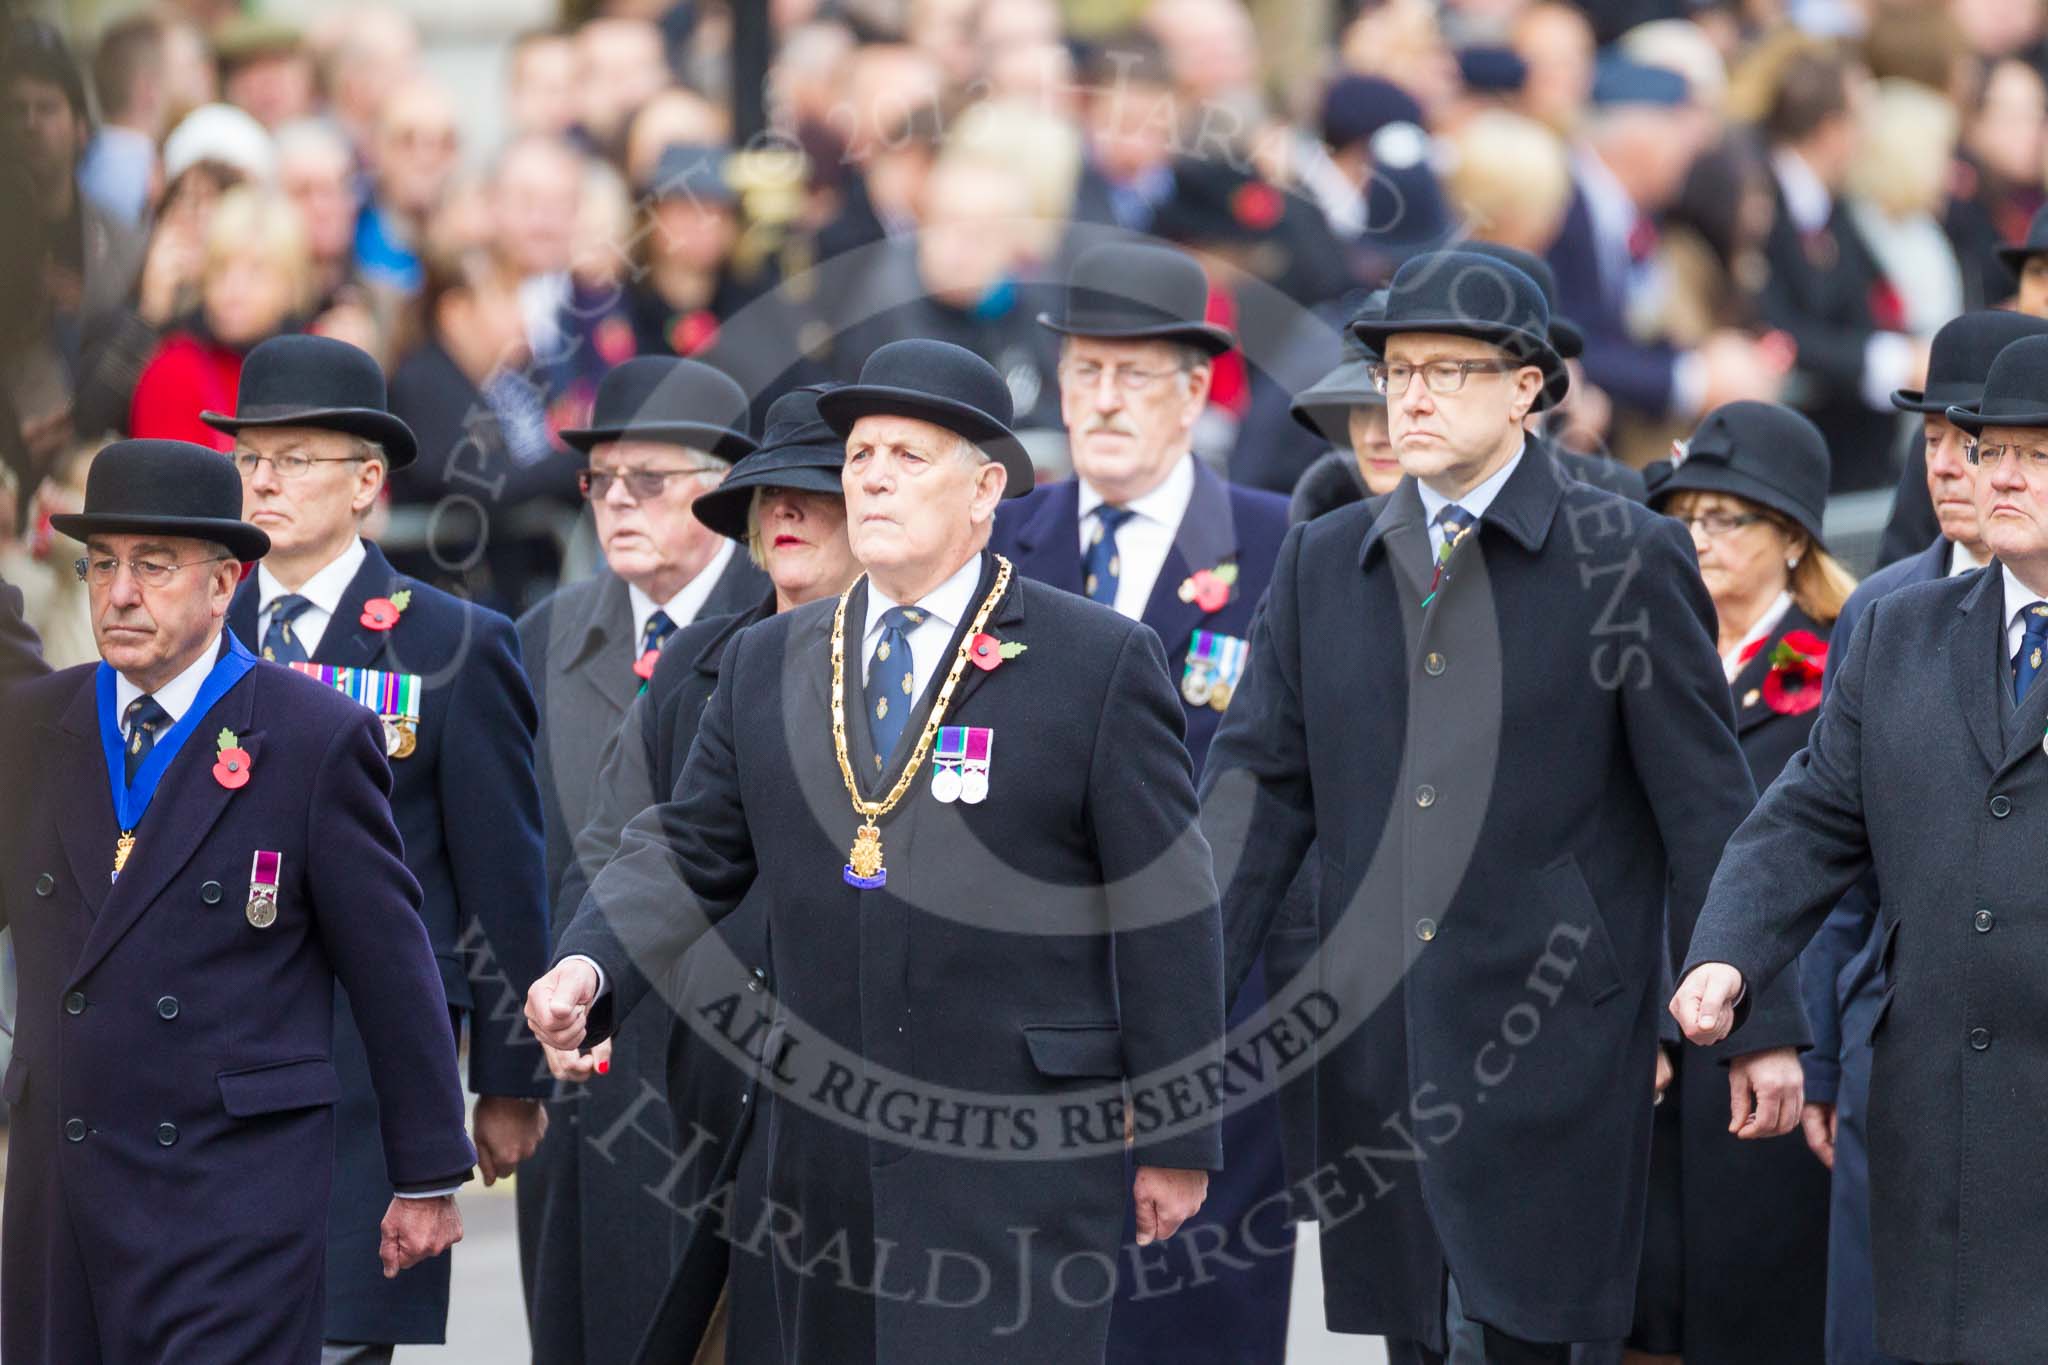 Remembrance Sunday at the Cenotaph 2015: The first column of veterans marching along Whitehall. Image #25, 08 November 2015 10:16 Whitehall, London, UK